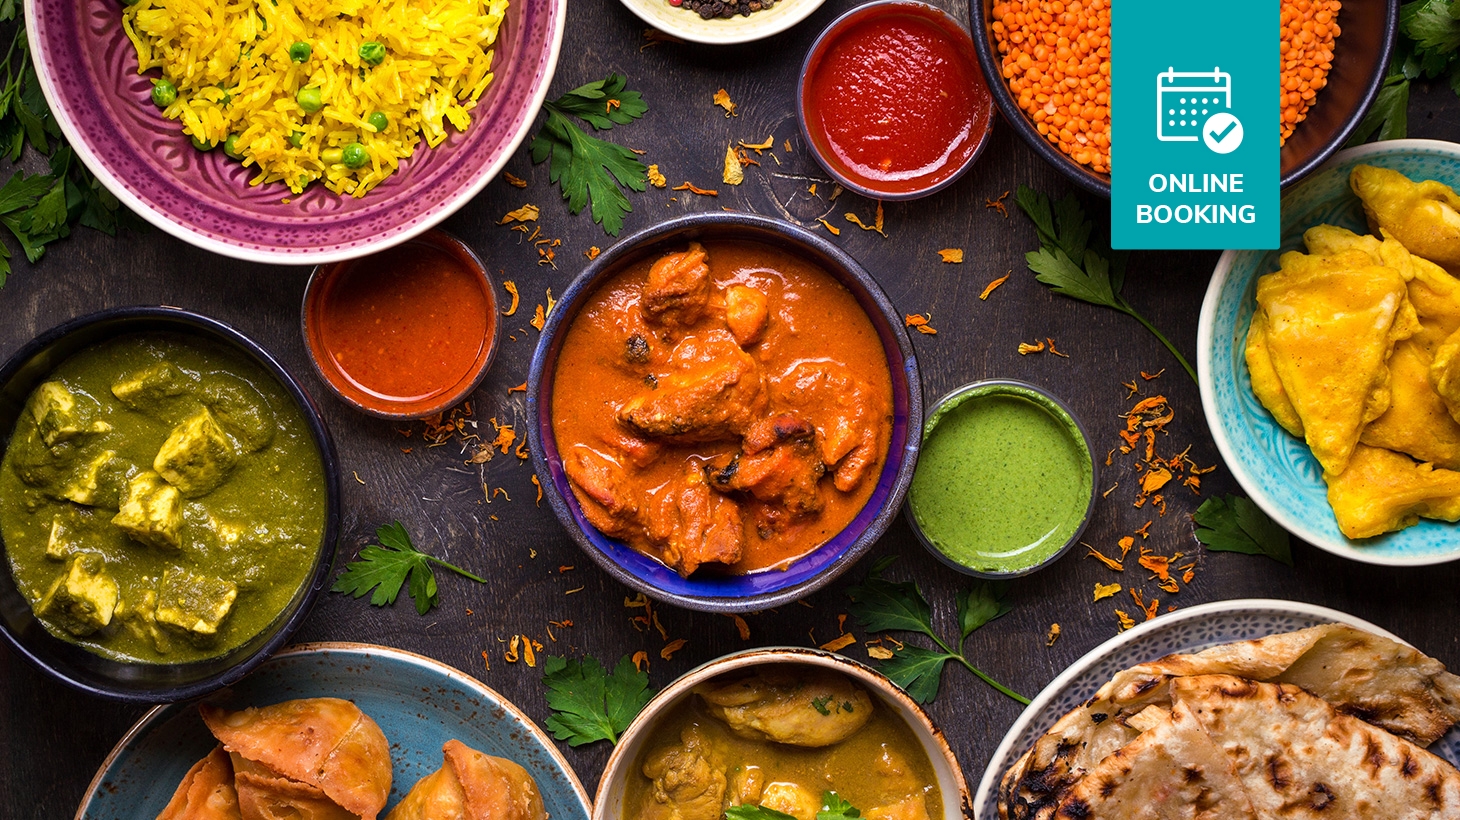 All-You-Can-Eat Indian Buffet Dinner with Drinks | Scoopon